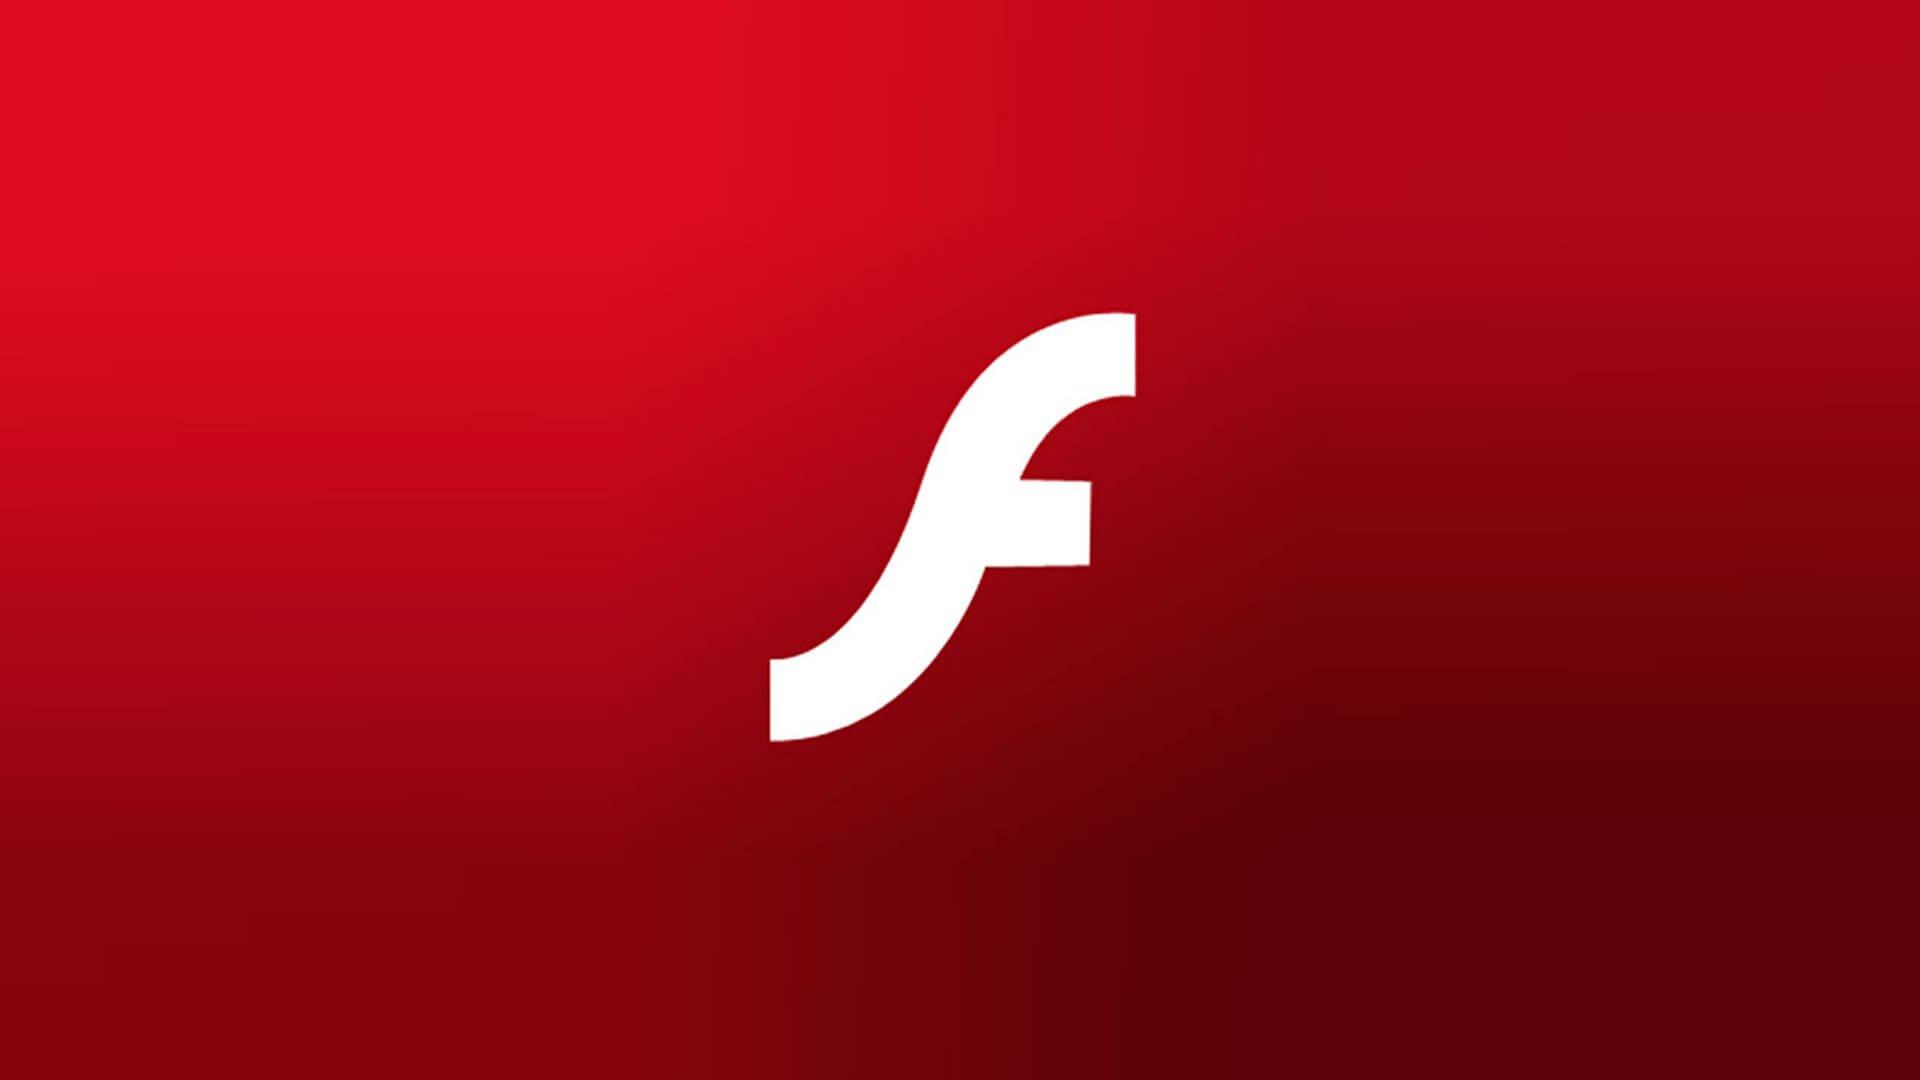 Windows 10 getting security updates for Adobe Flash Player